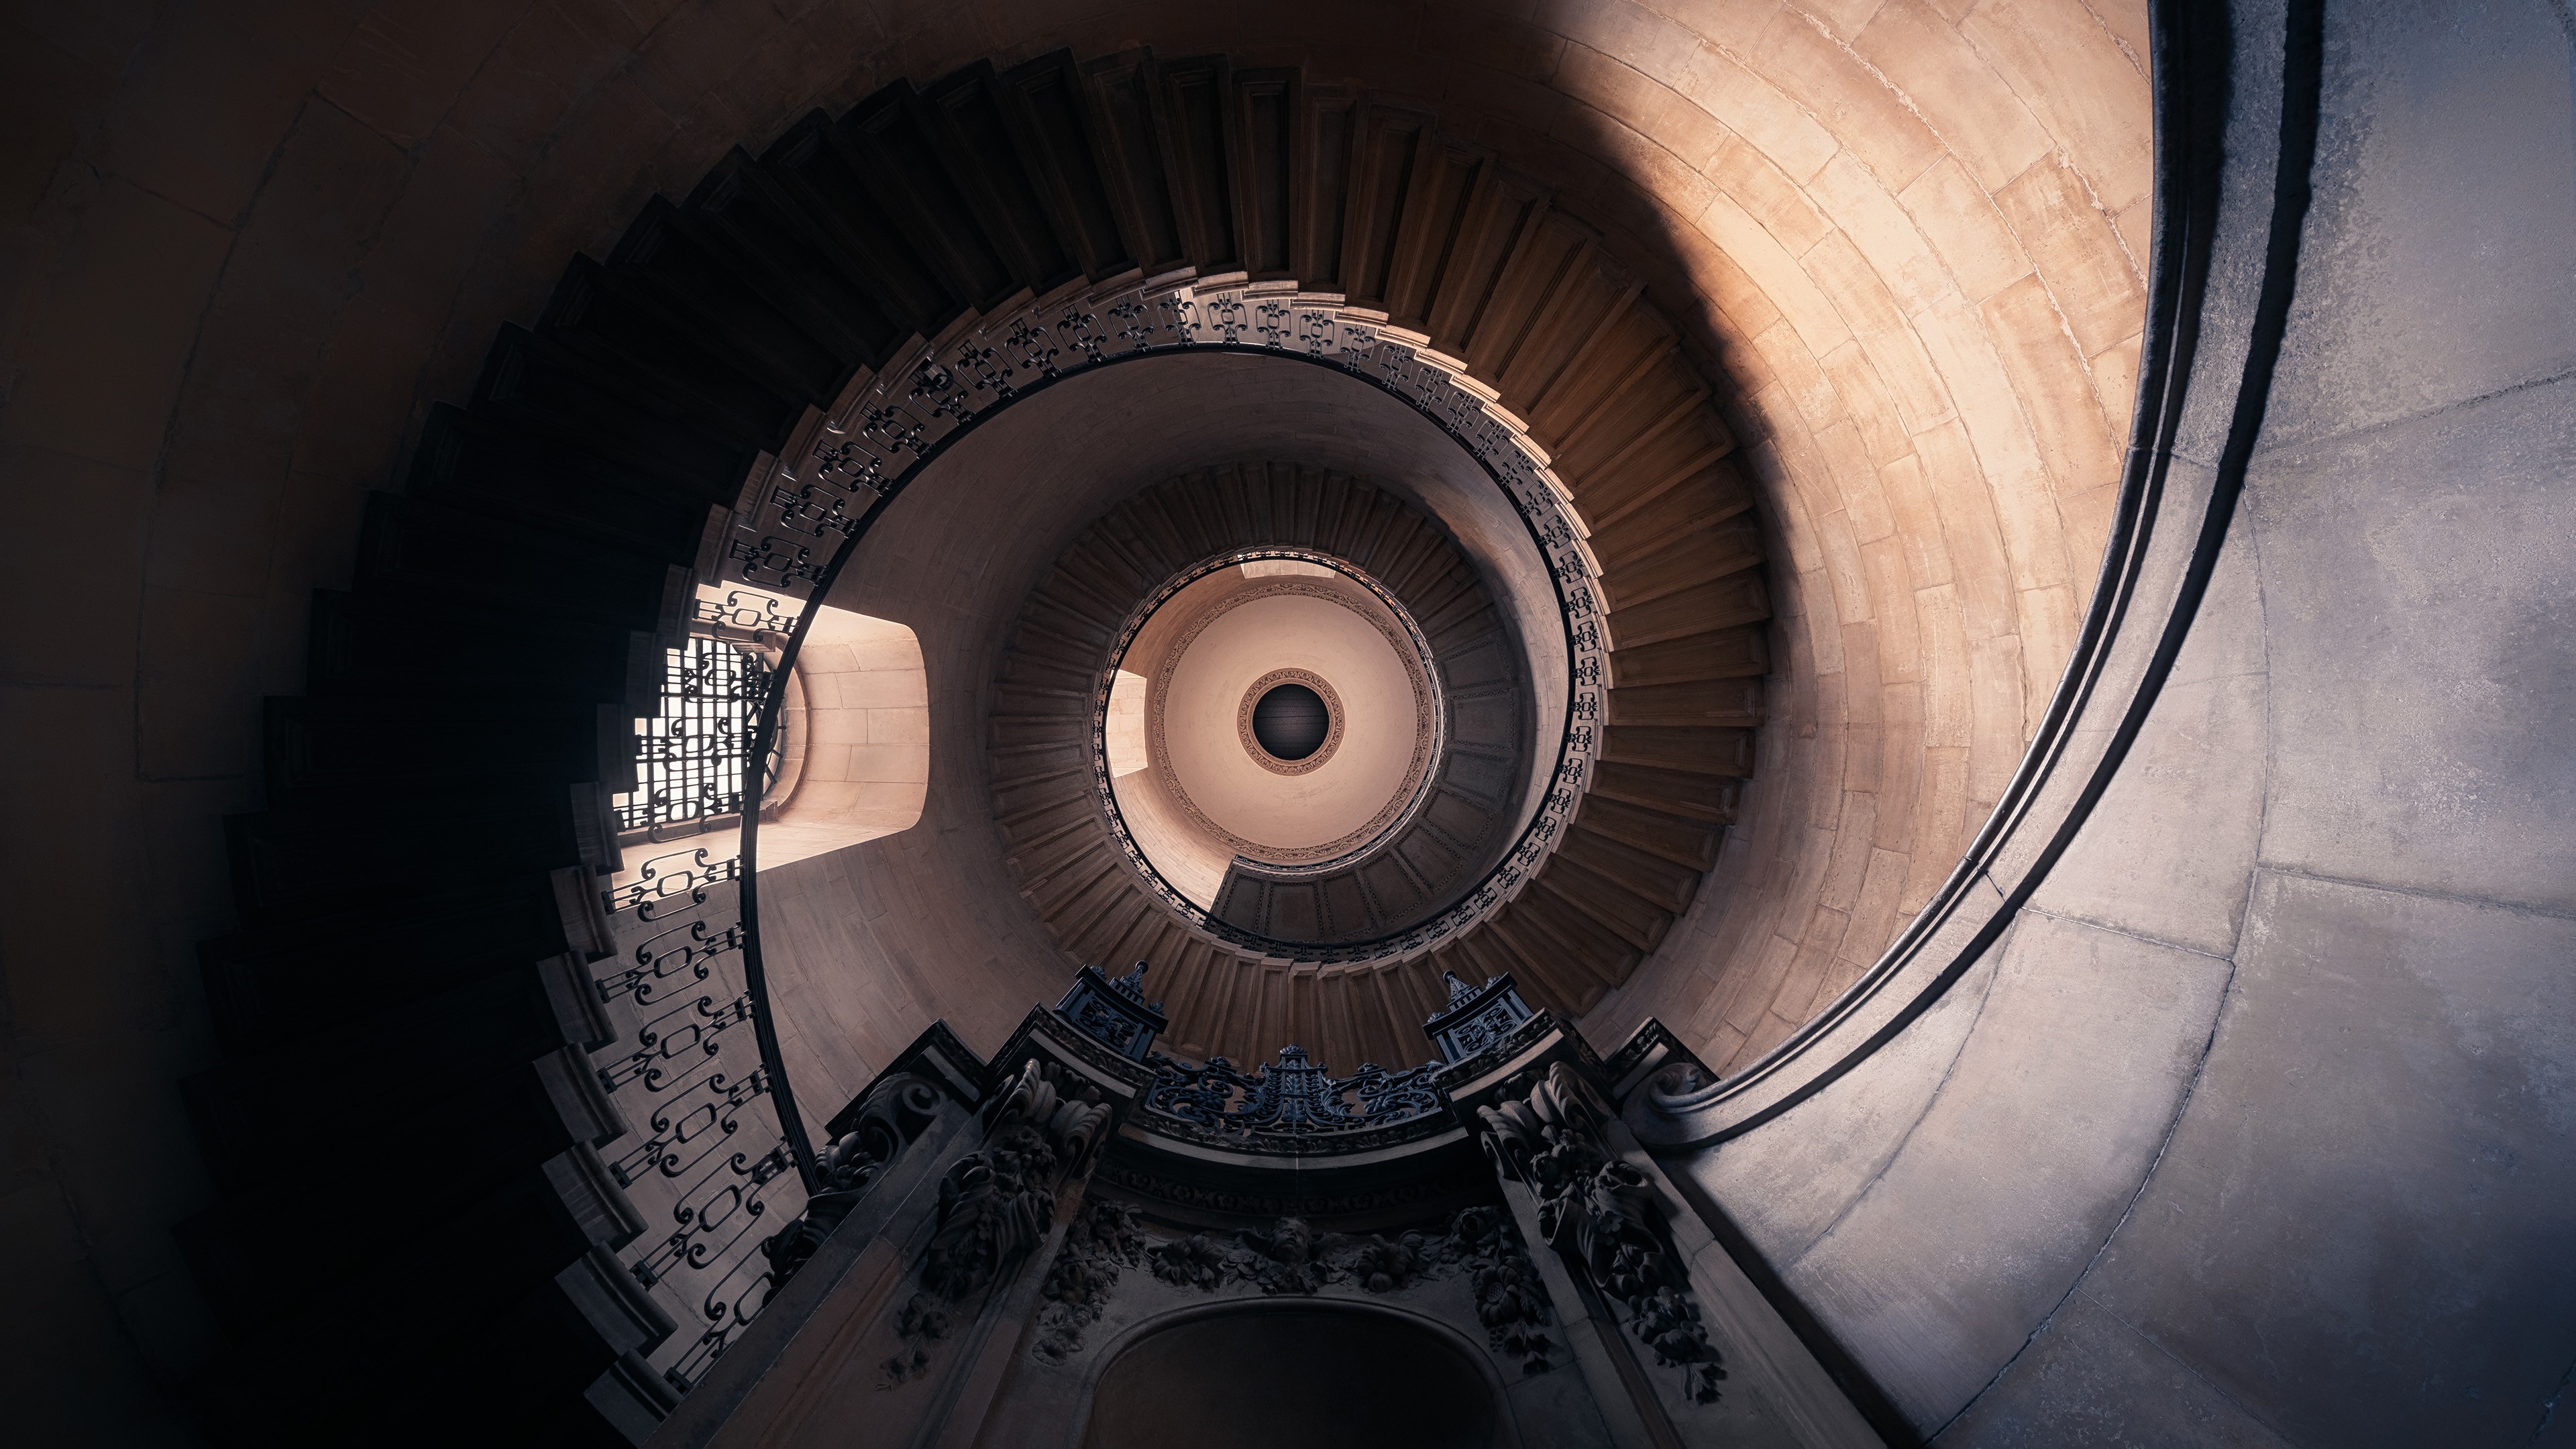 man made, stairs, spiral staircase, st paul's cathedral